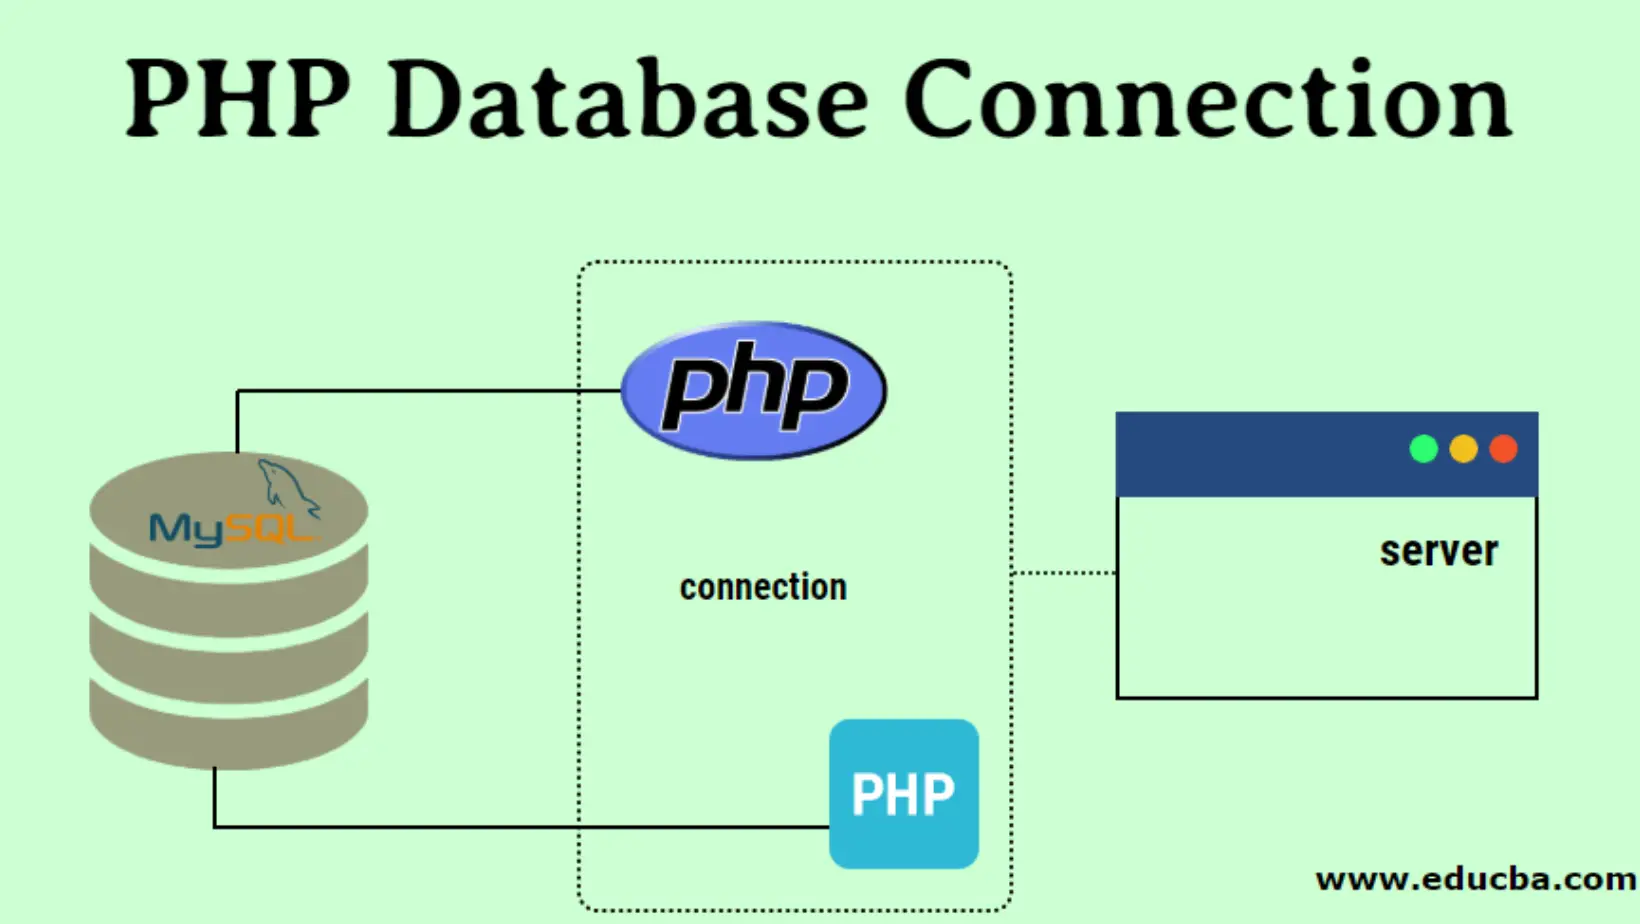 PHP and Databases